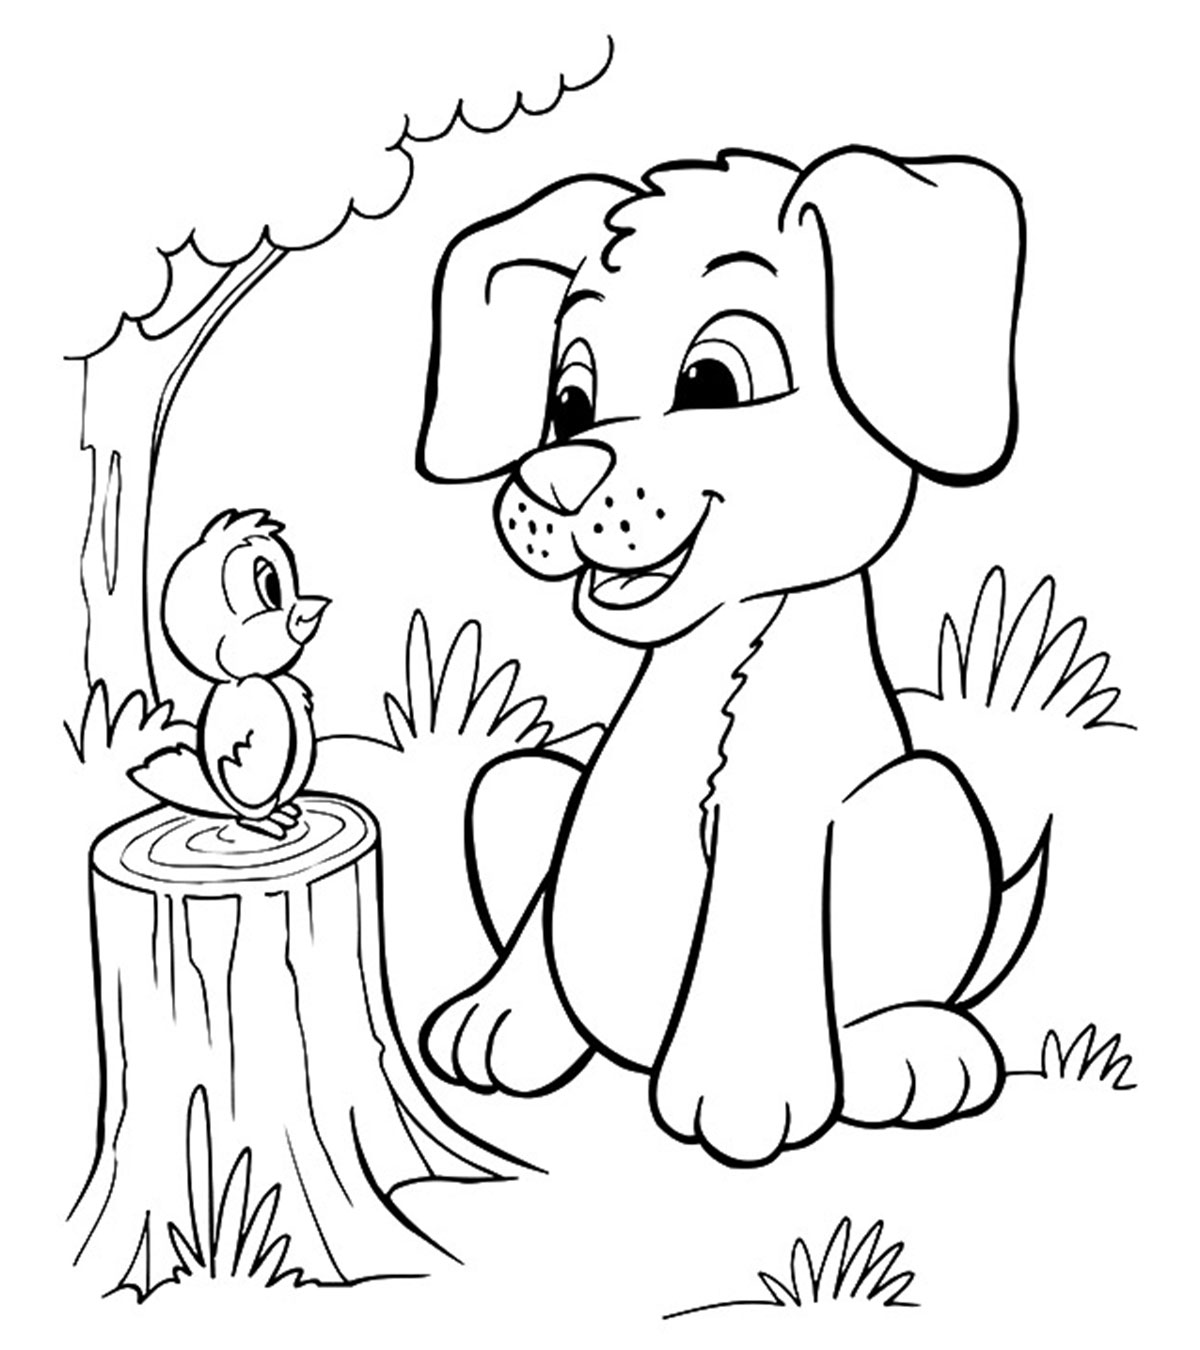 4400 Show Dogs Coloring Pages Pictures